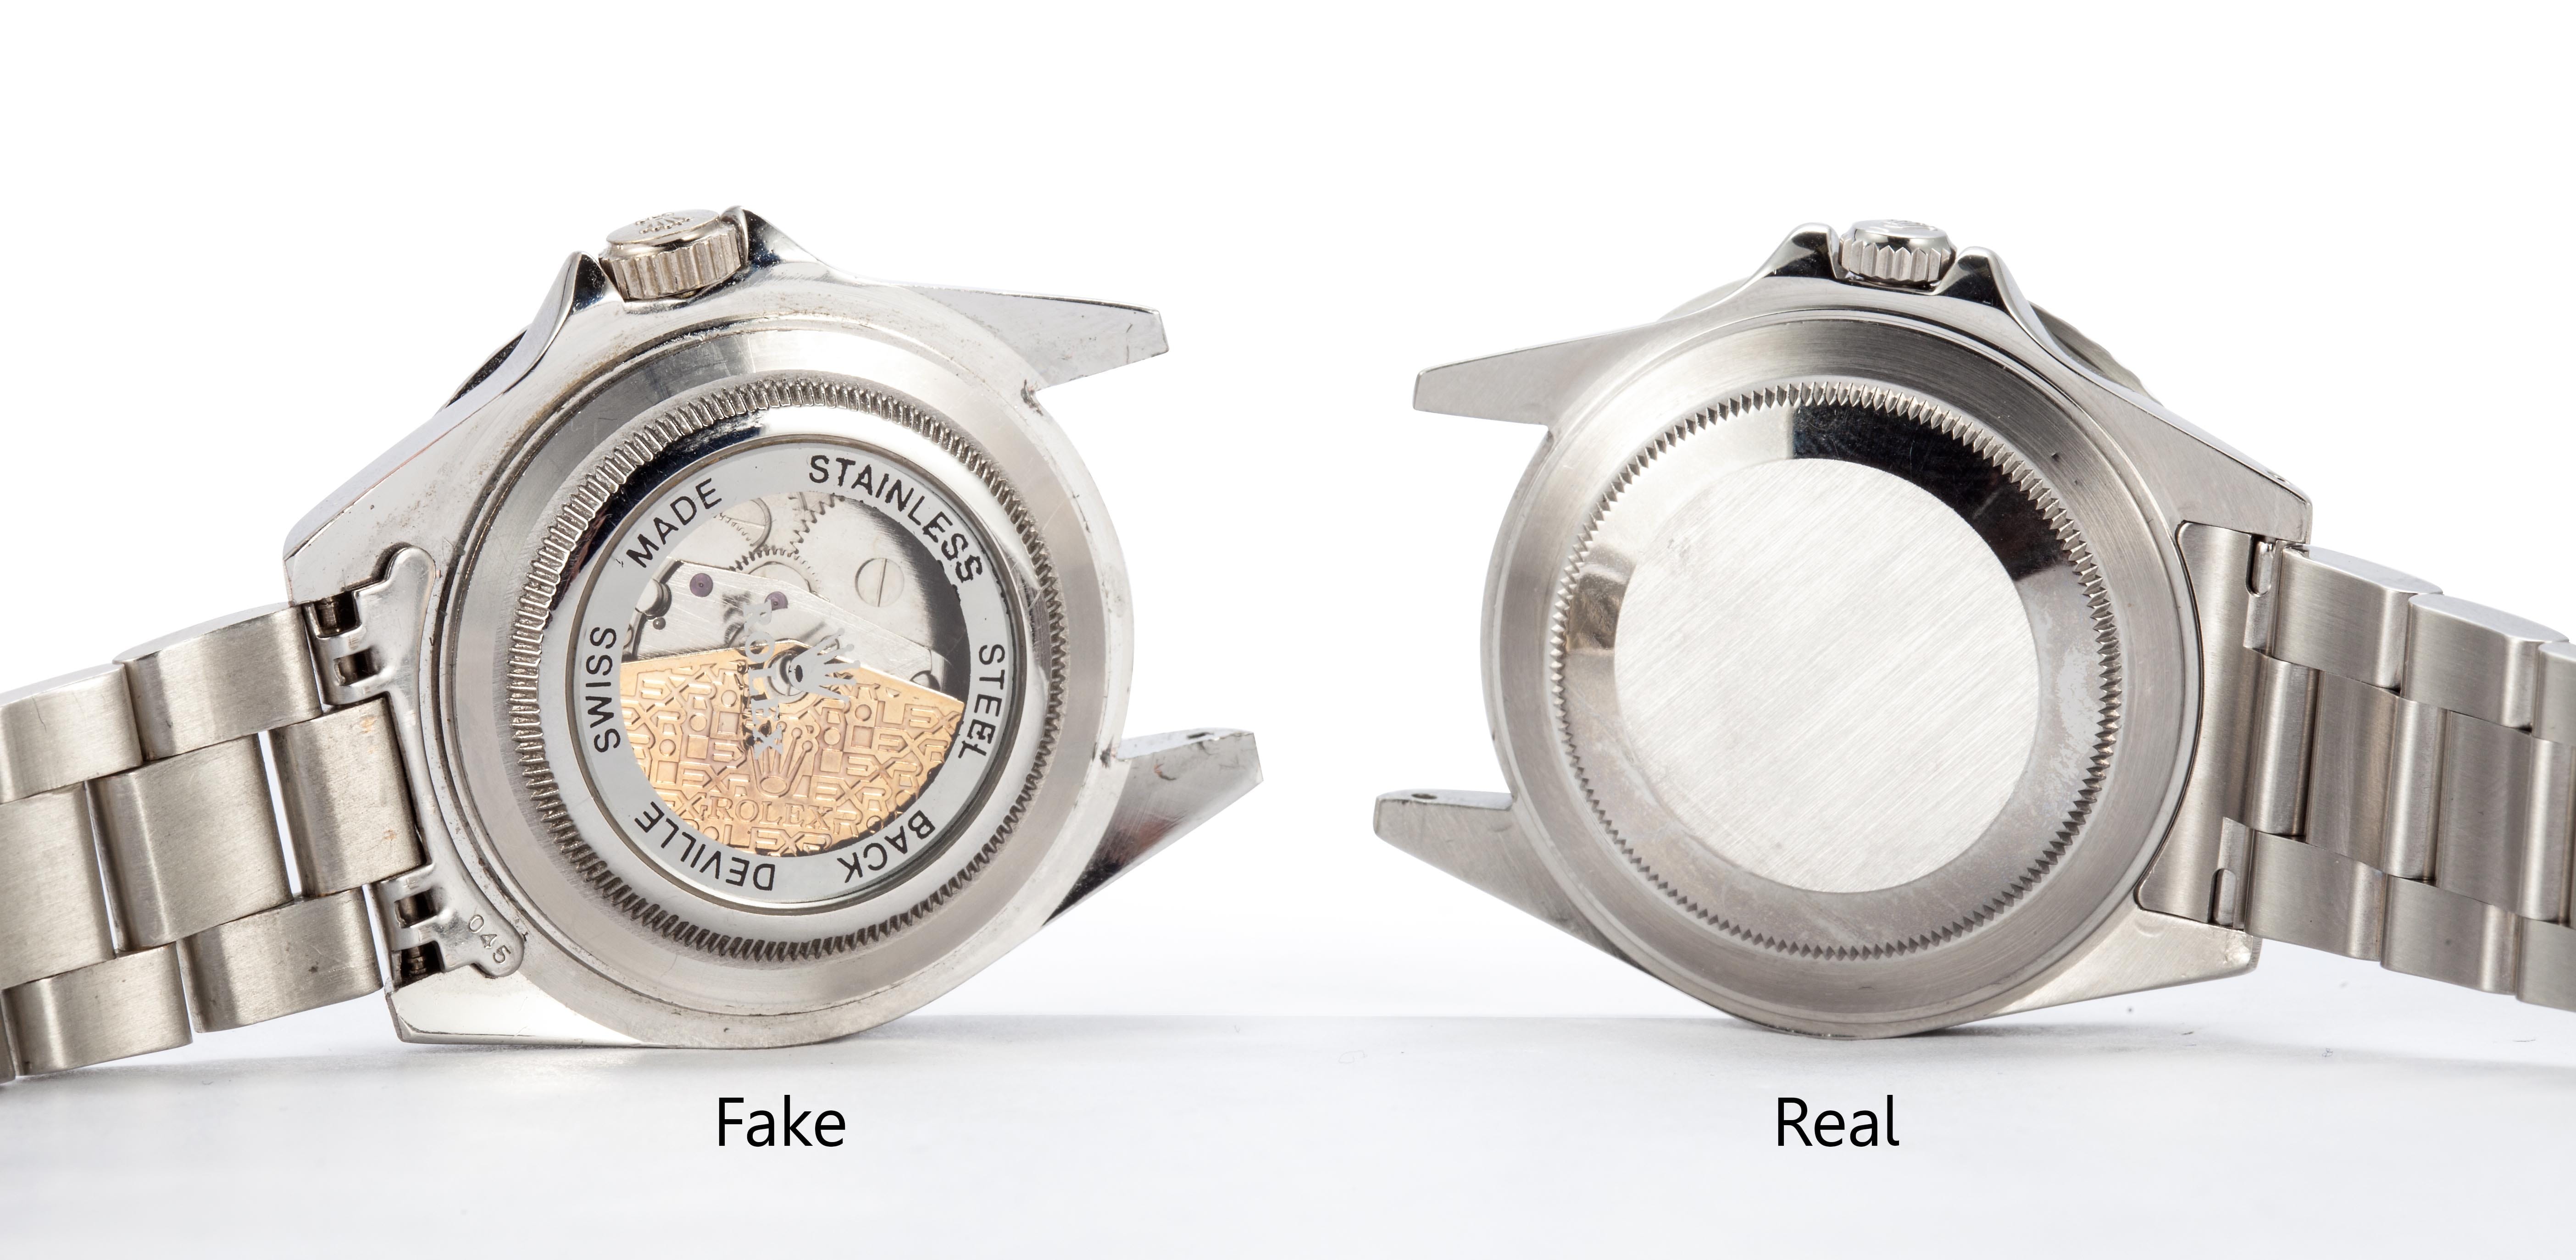 how to check if the rolex is real